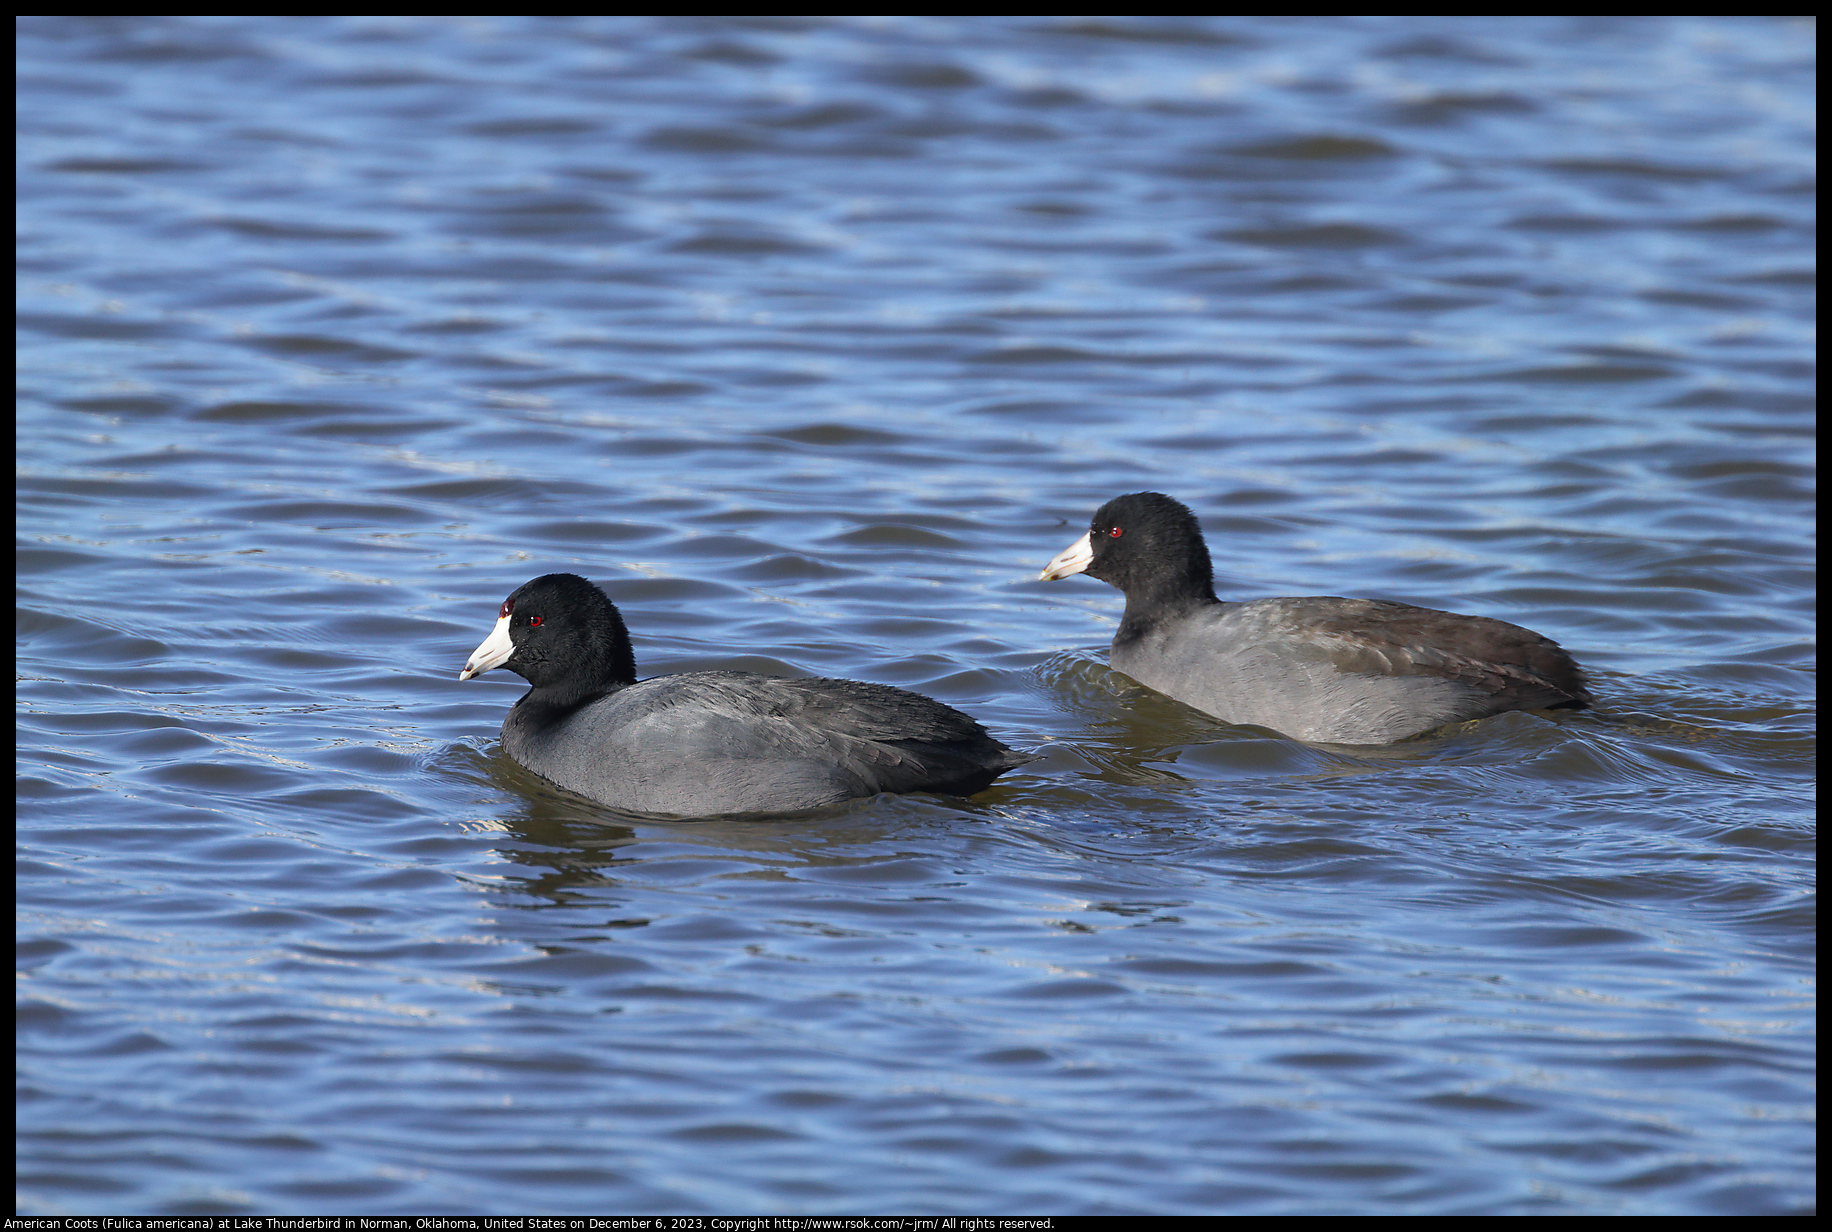 American Coots (Fulica americana) at Lake Thunderbird in Norman, Oklahoma, United States on December 6, 2023